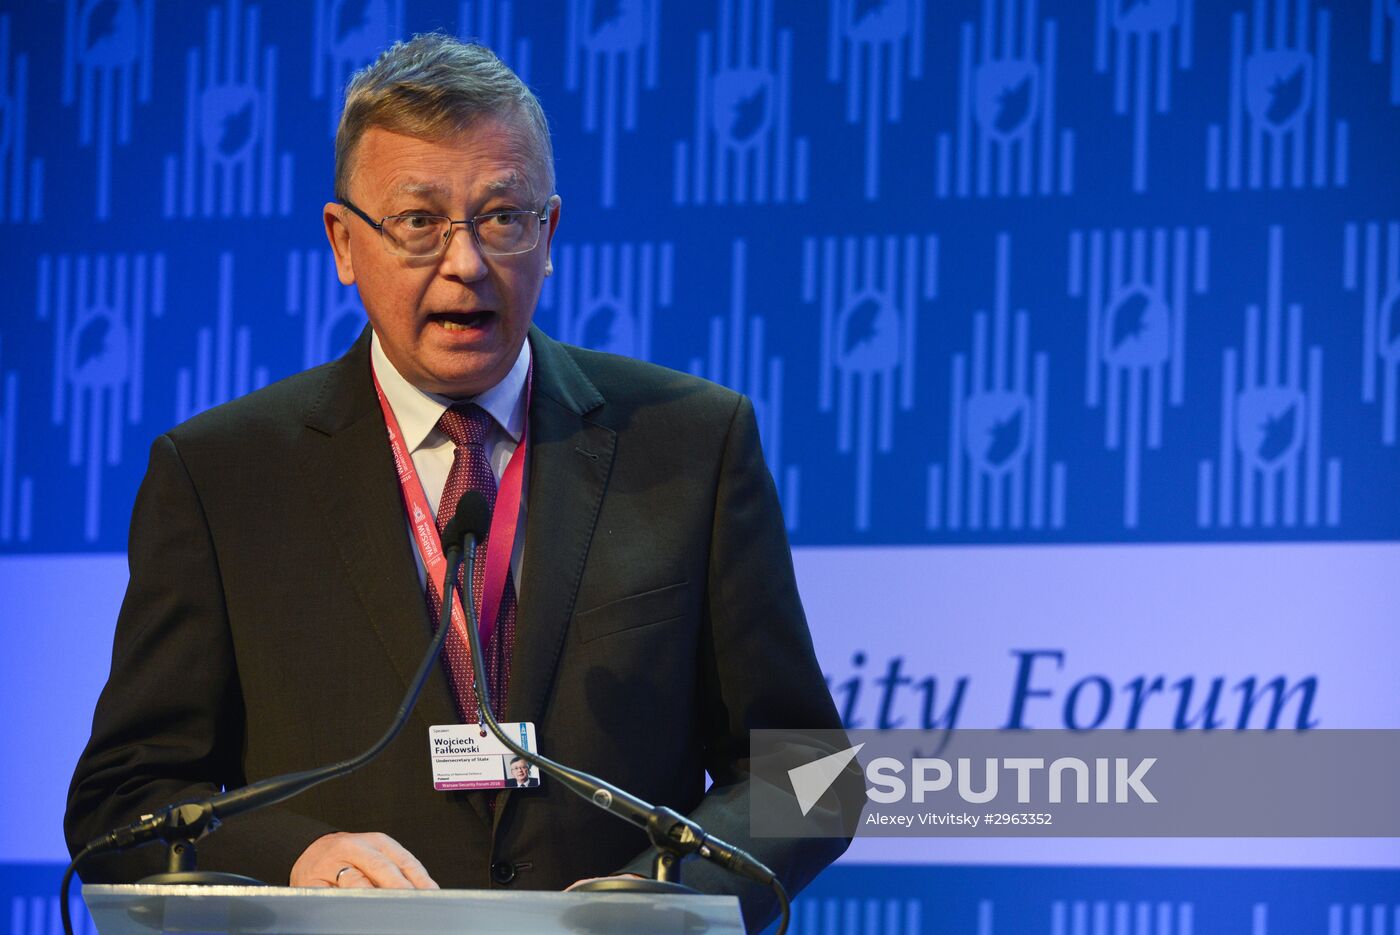 Security Forum in Warsaw